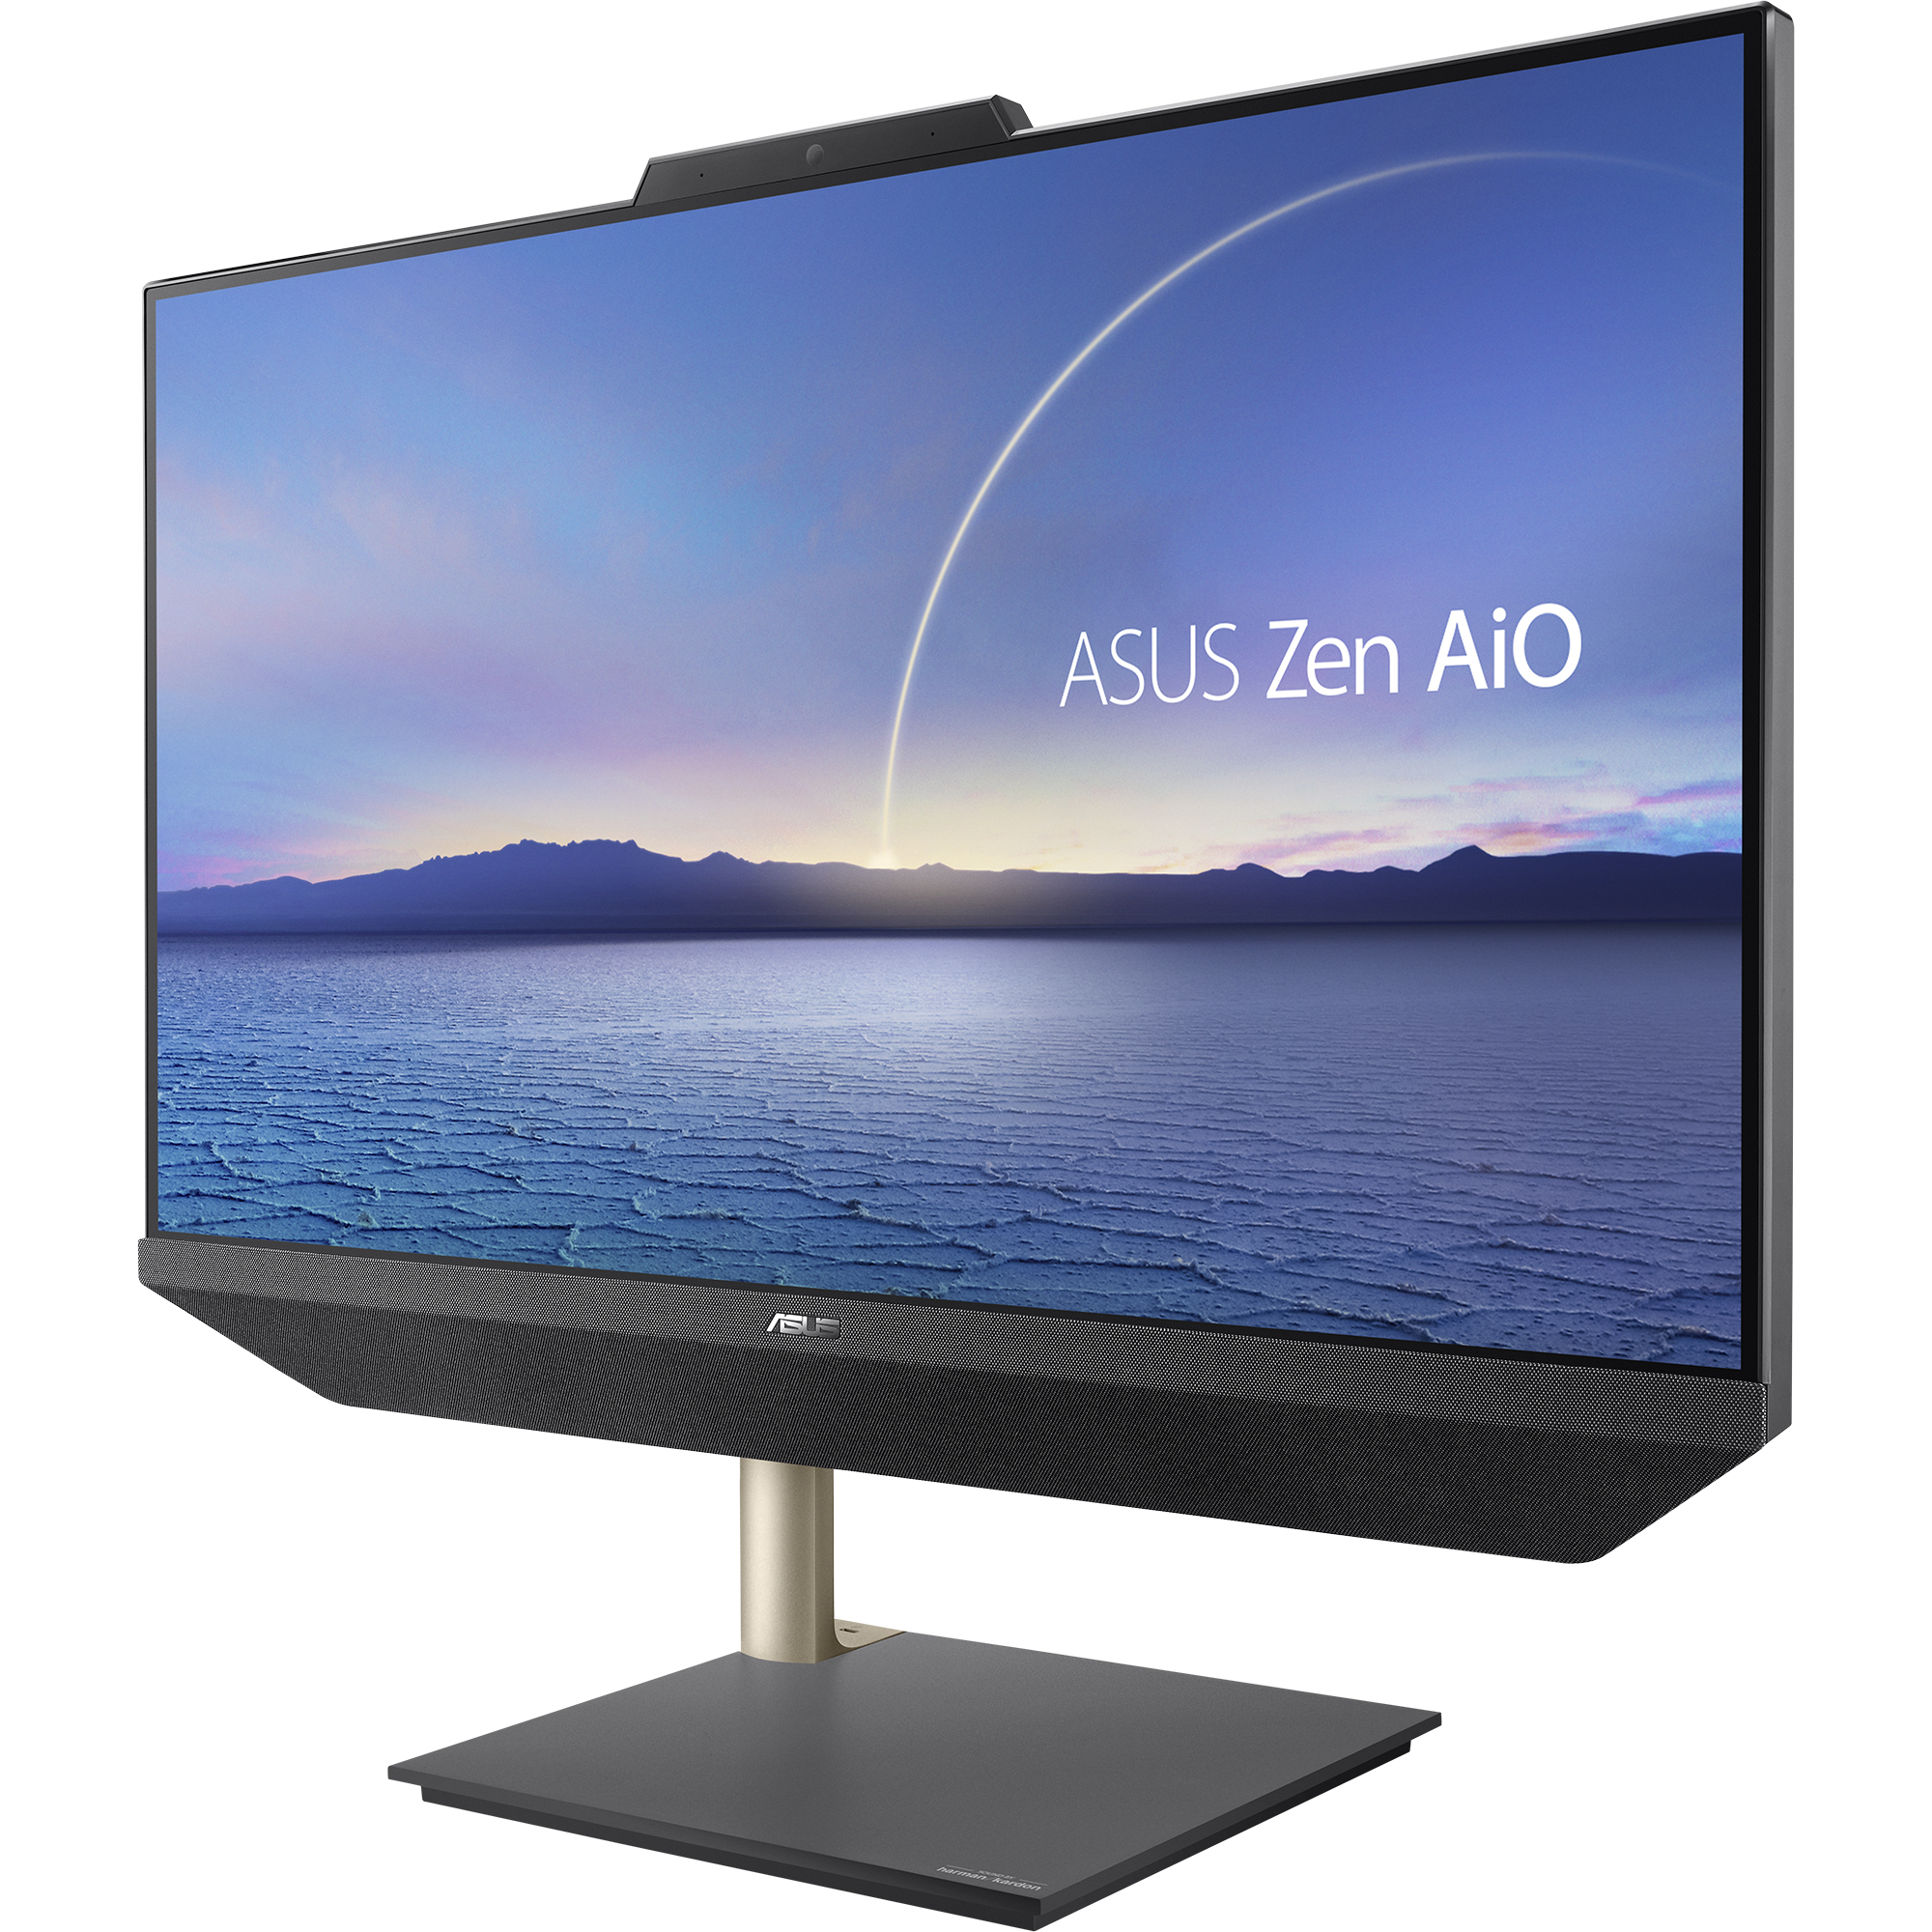 ASUS Zen AiO 24 A5401WRAK-BA067T All-in-One PC/workstation